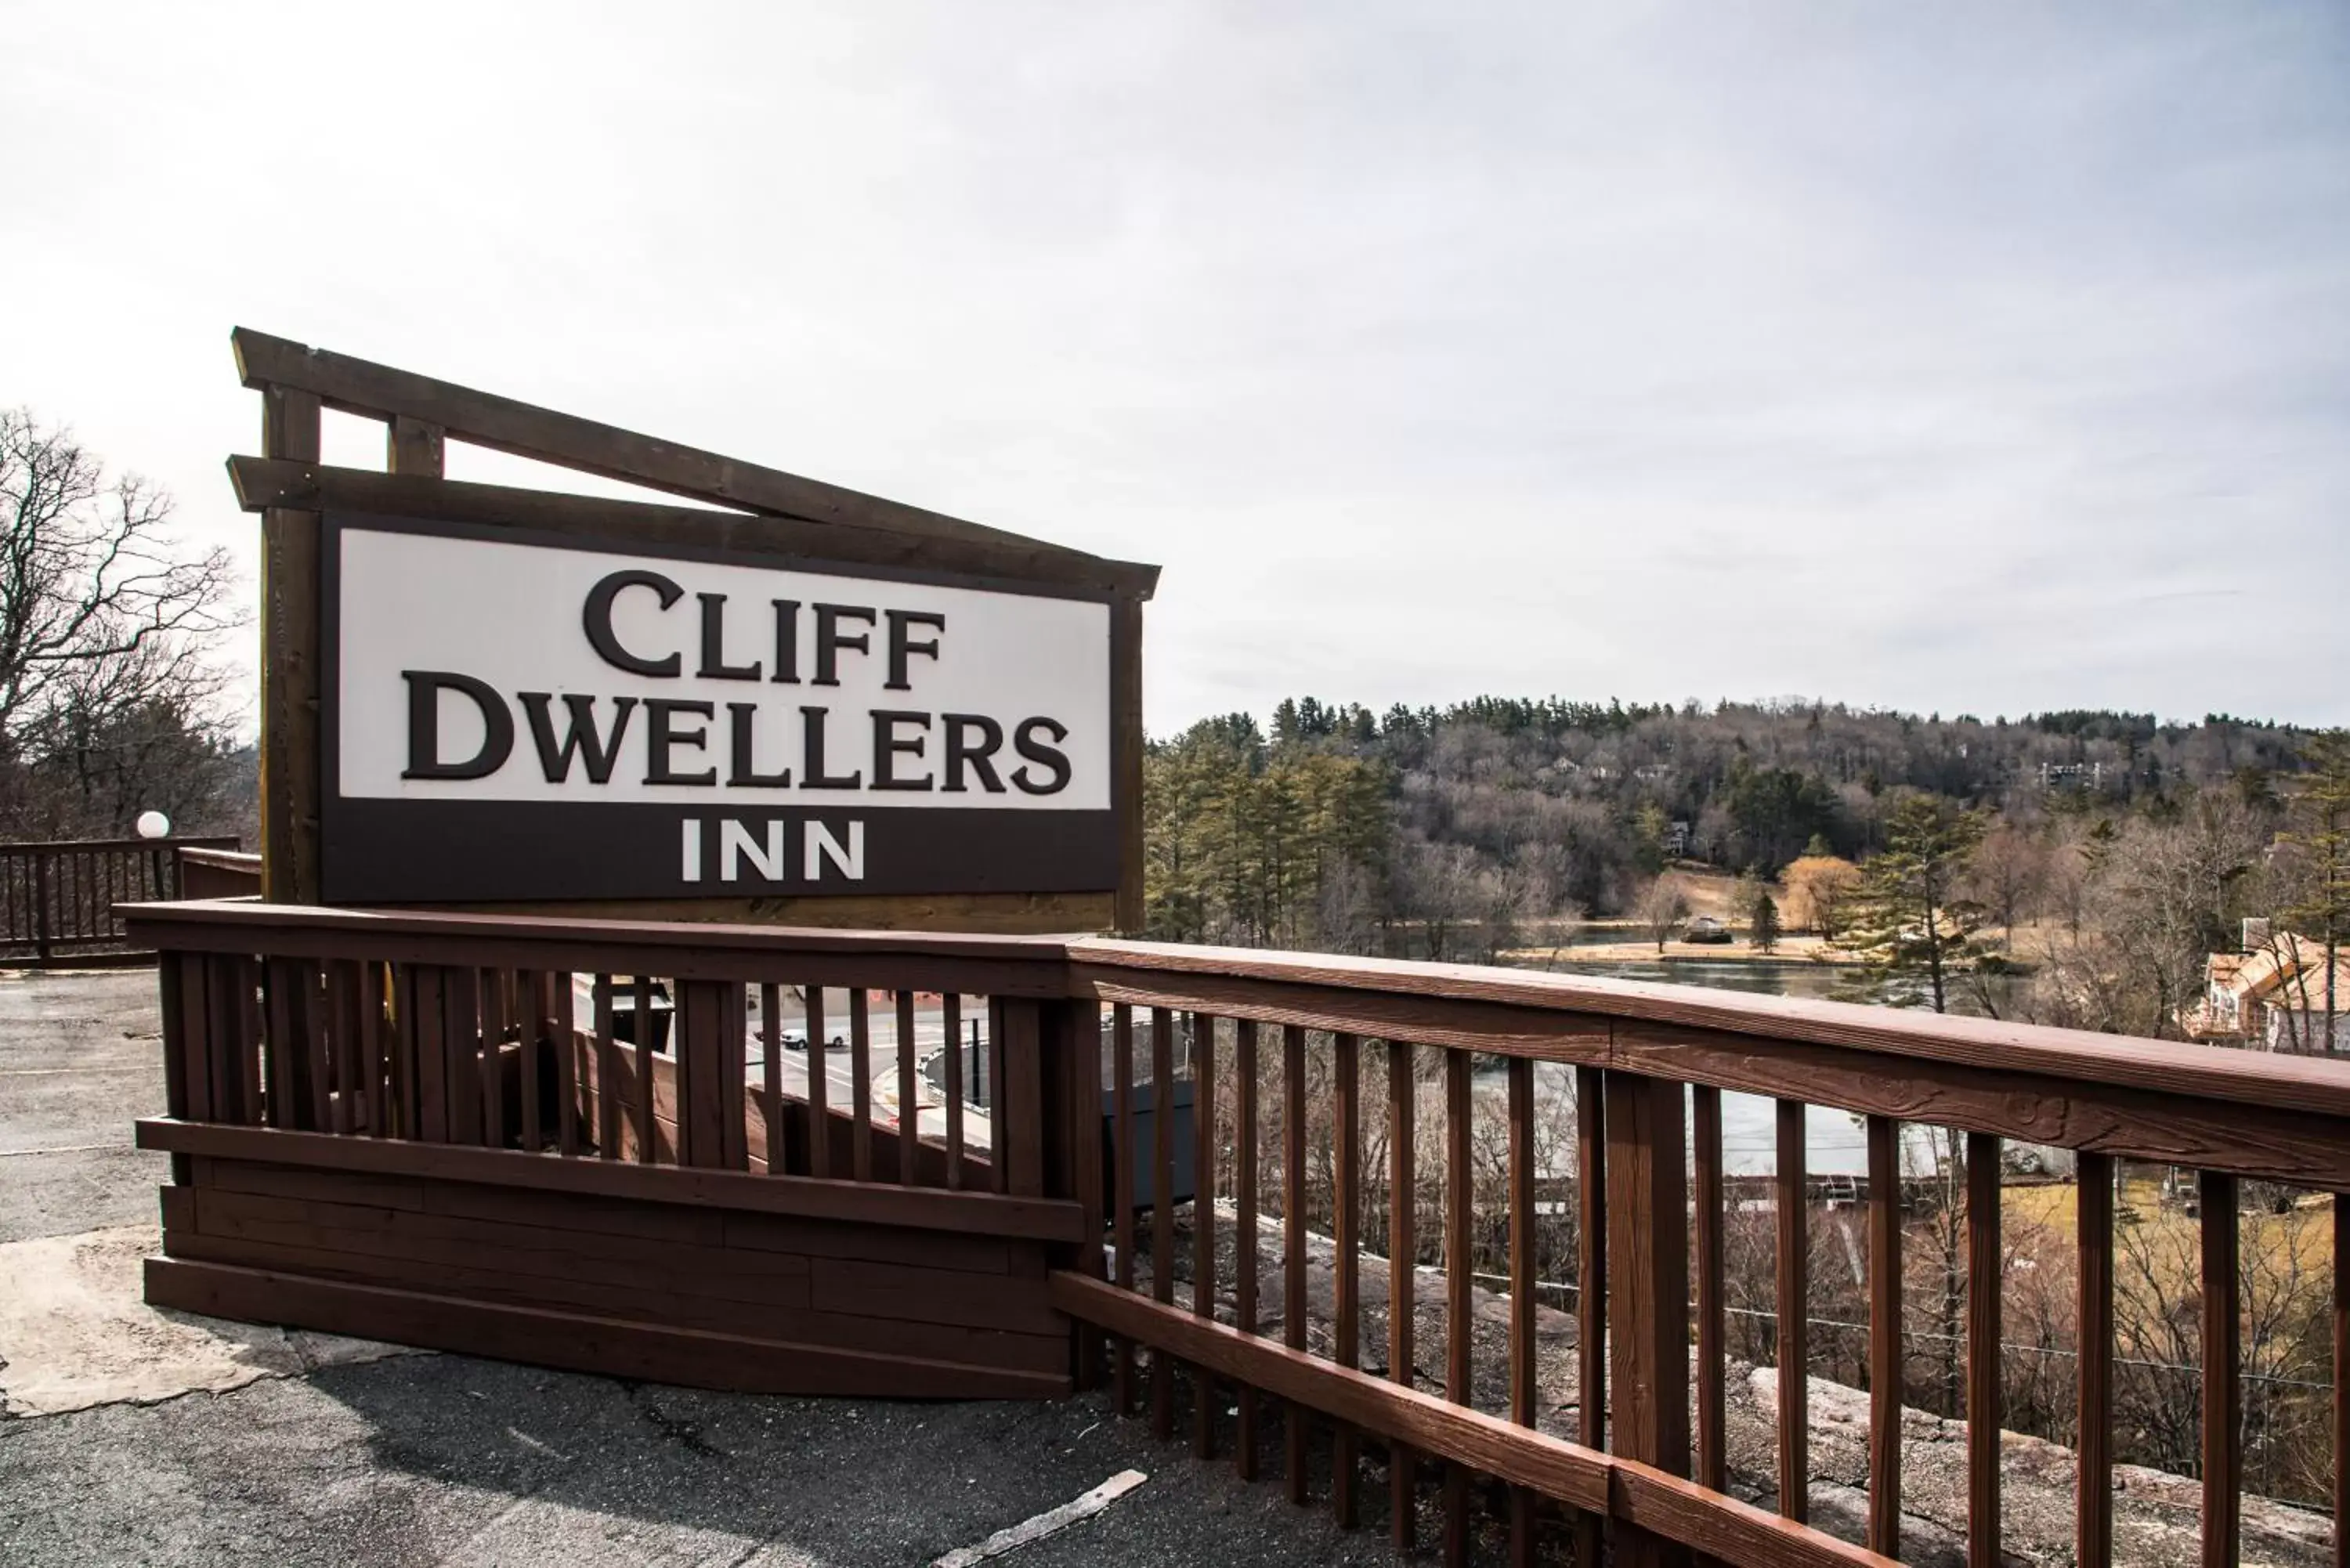 Property logo or sign in Cliff Dwellers Inn